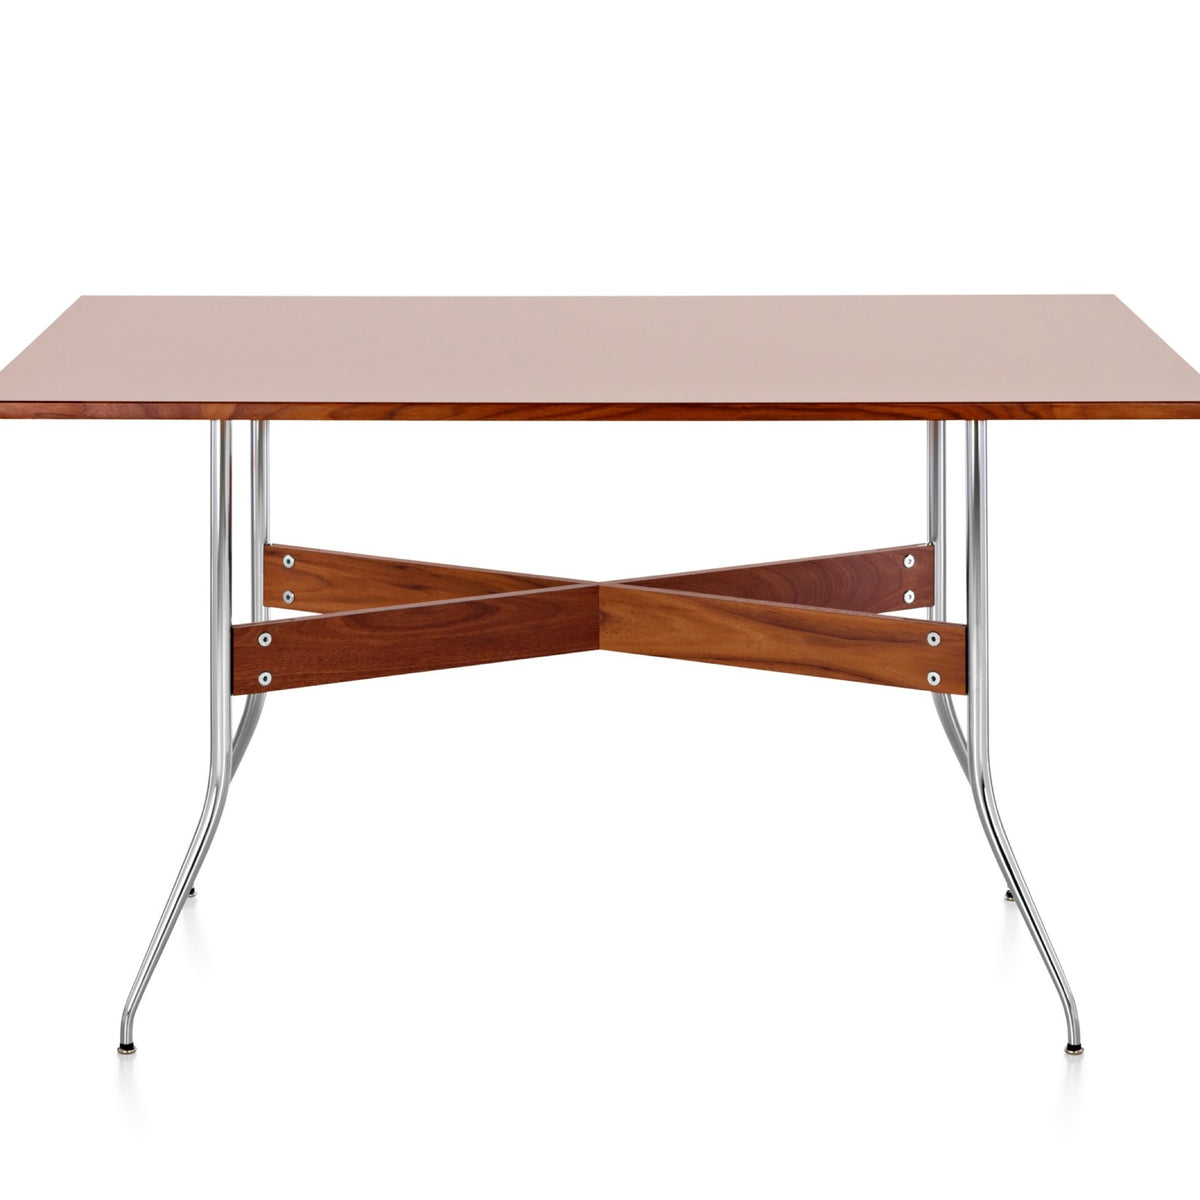 Nelson Swag Leg Dining Table with Rectangular Top - Walnut